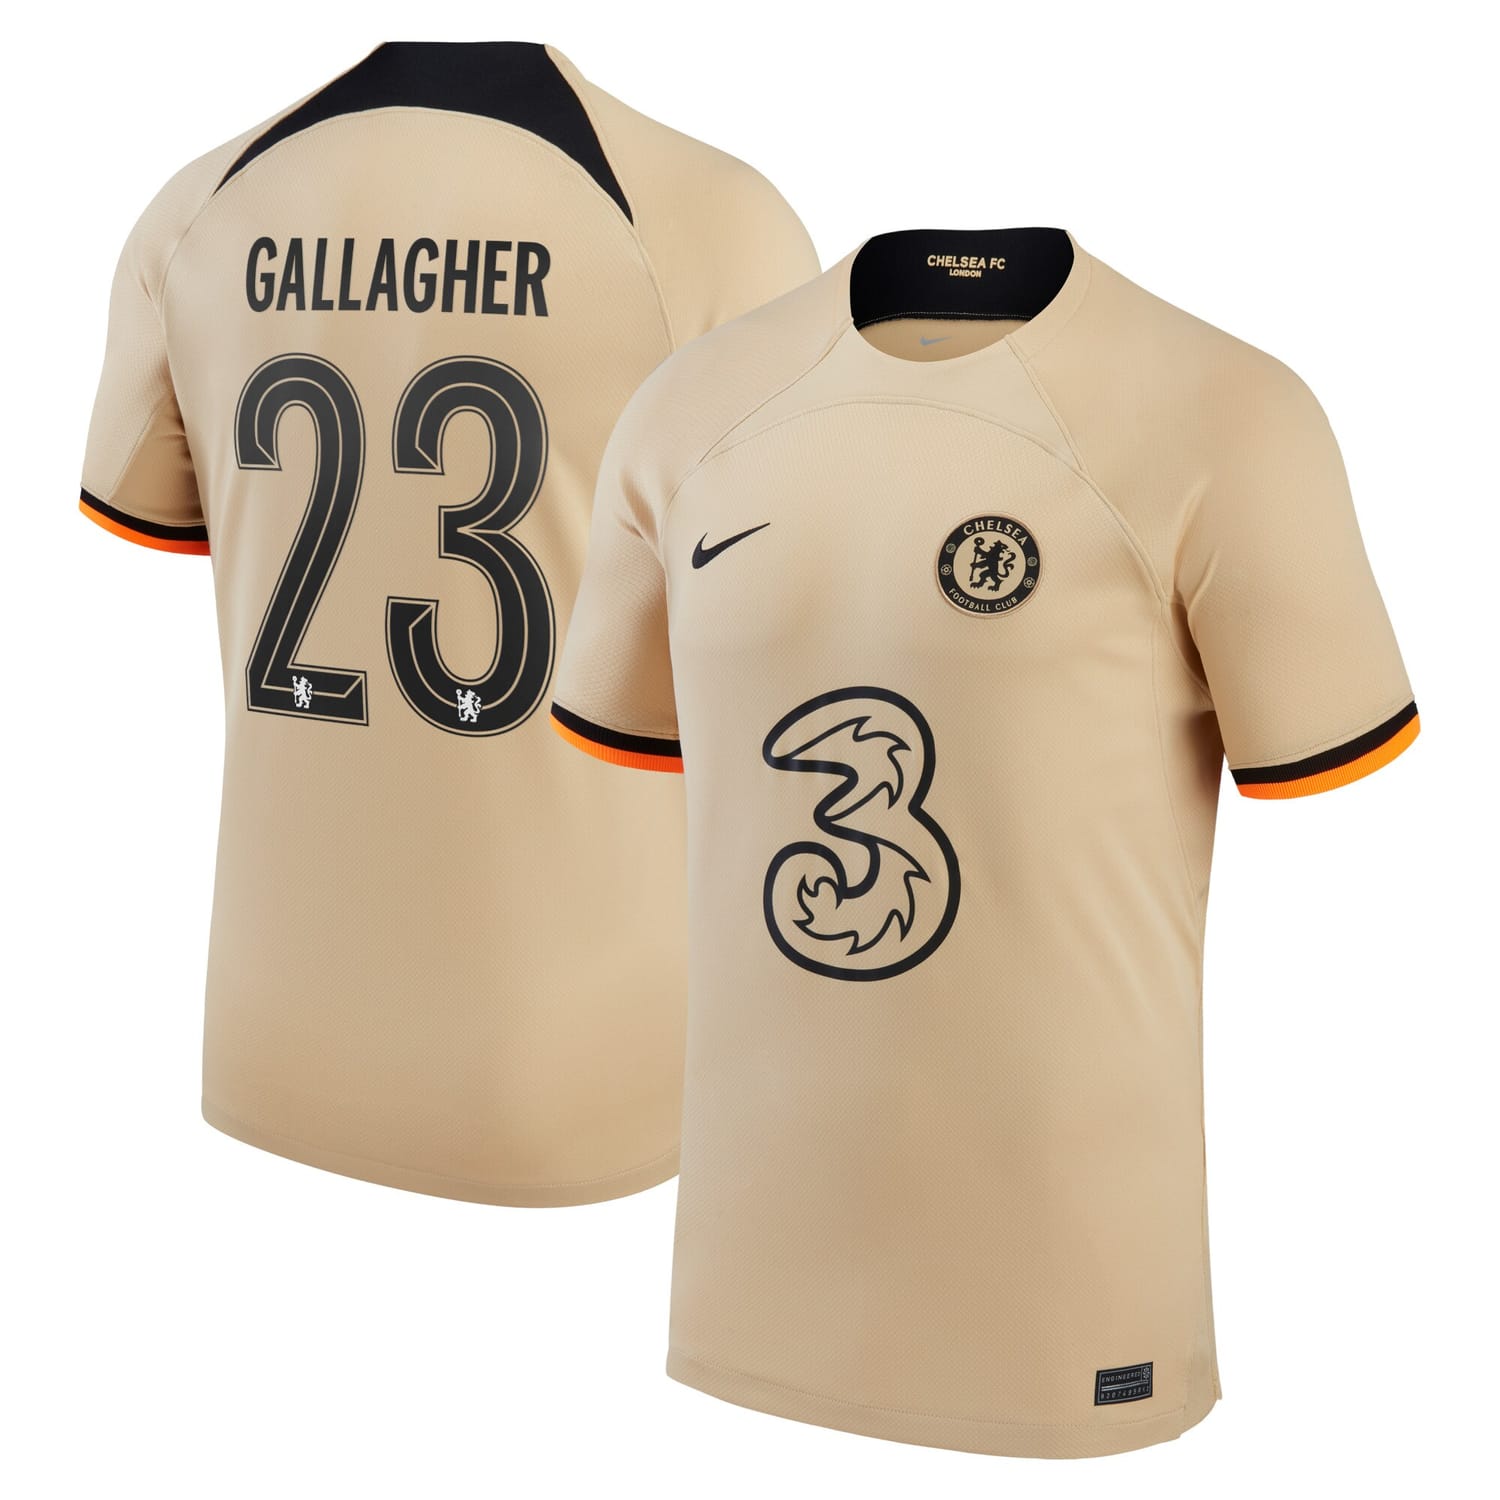 Premier League Chelsea Third Cup Jersey Shirt 2022-23 player Conor Gallagher 23 printing for Men